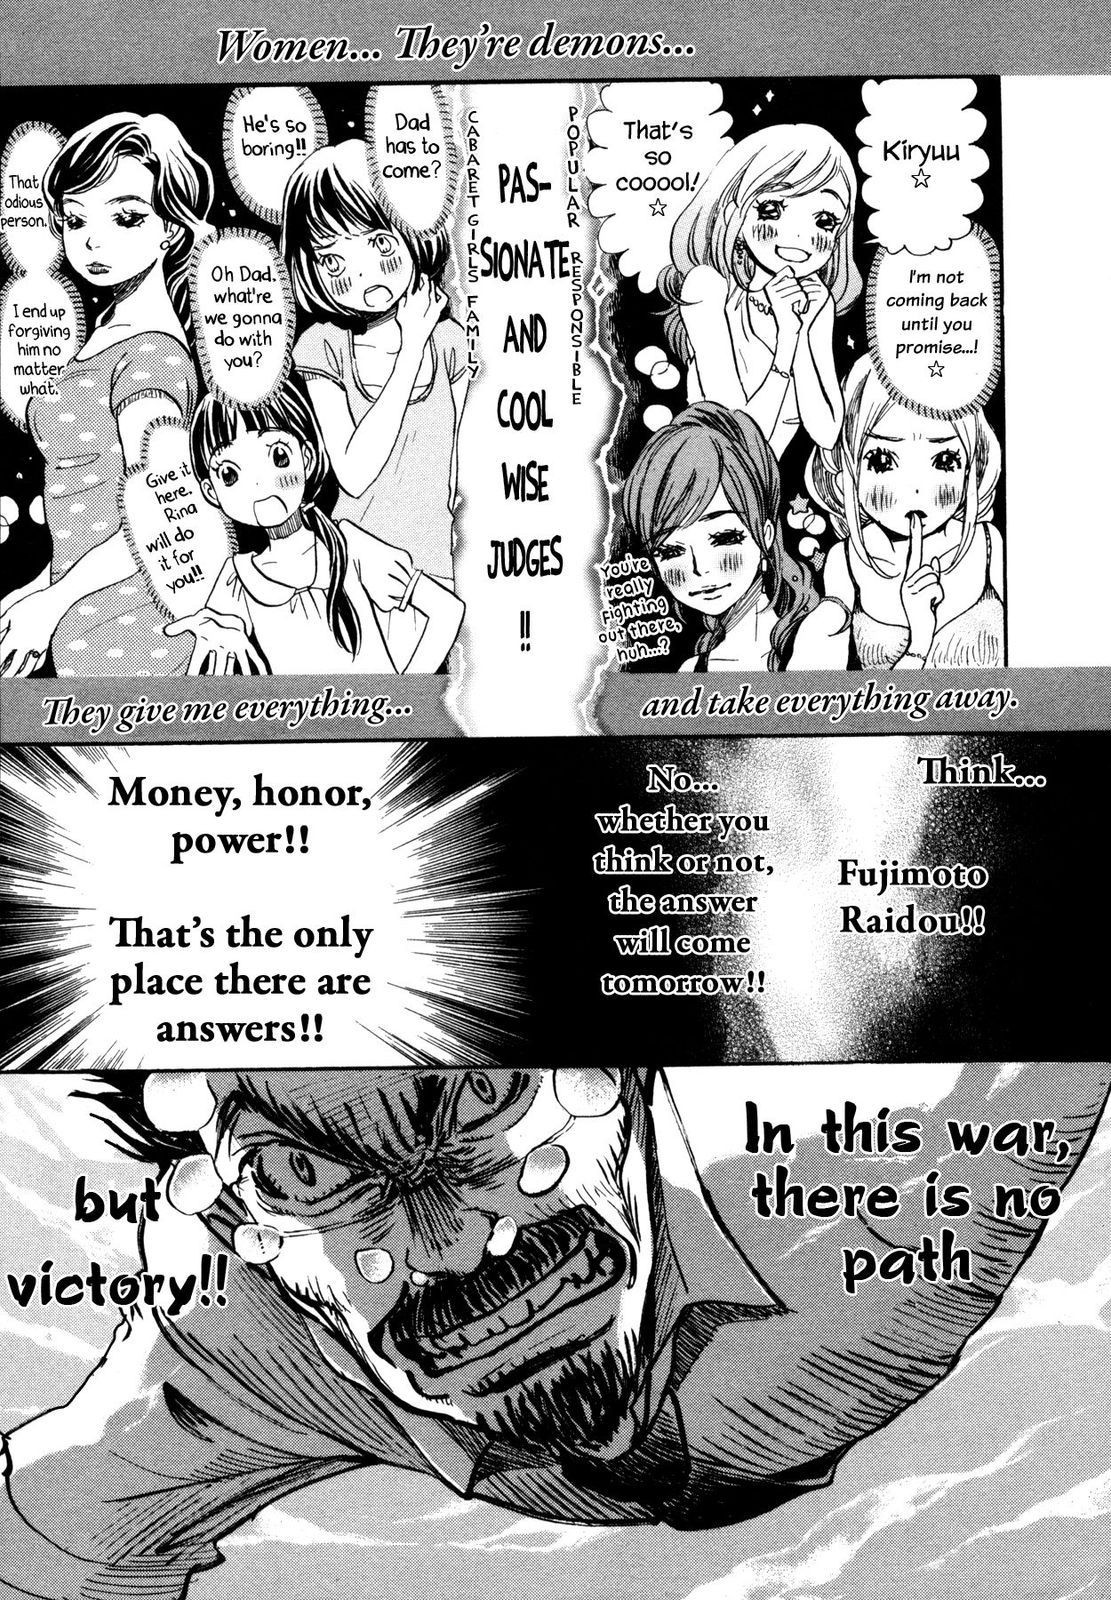 March Comes in Like a Lion, Chapter 118 The Satsuma Arc (Part 2) (EN) image 09